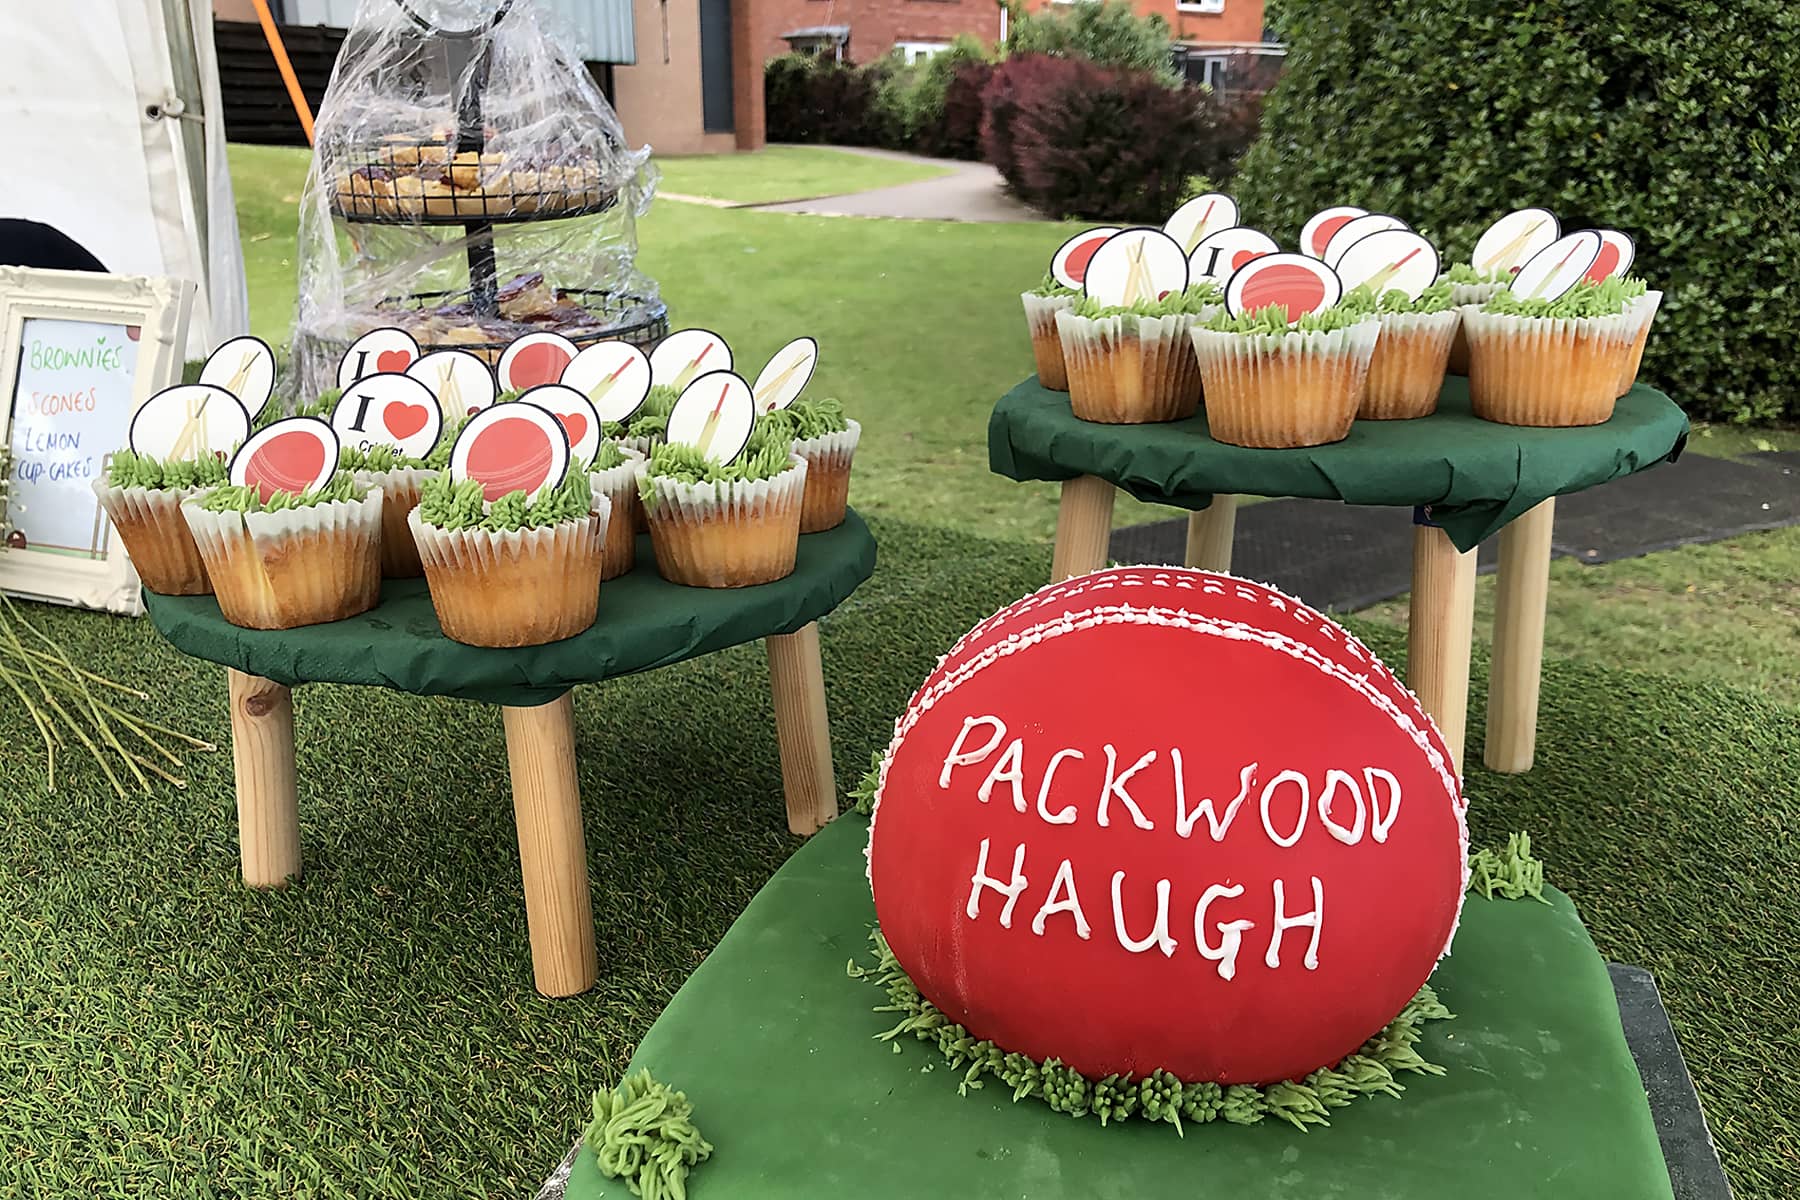 Decorative cupcakes made by Packwood catering team